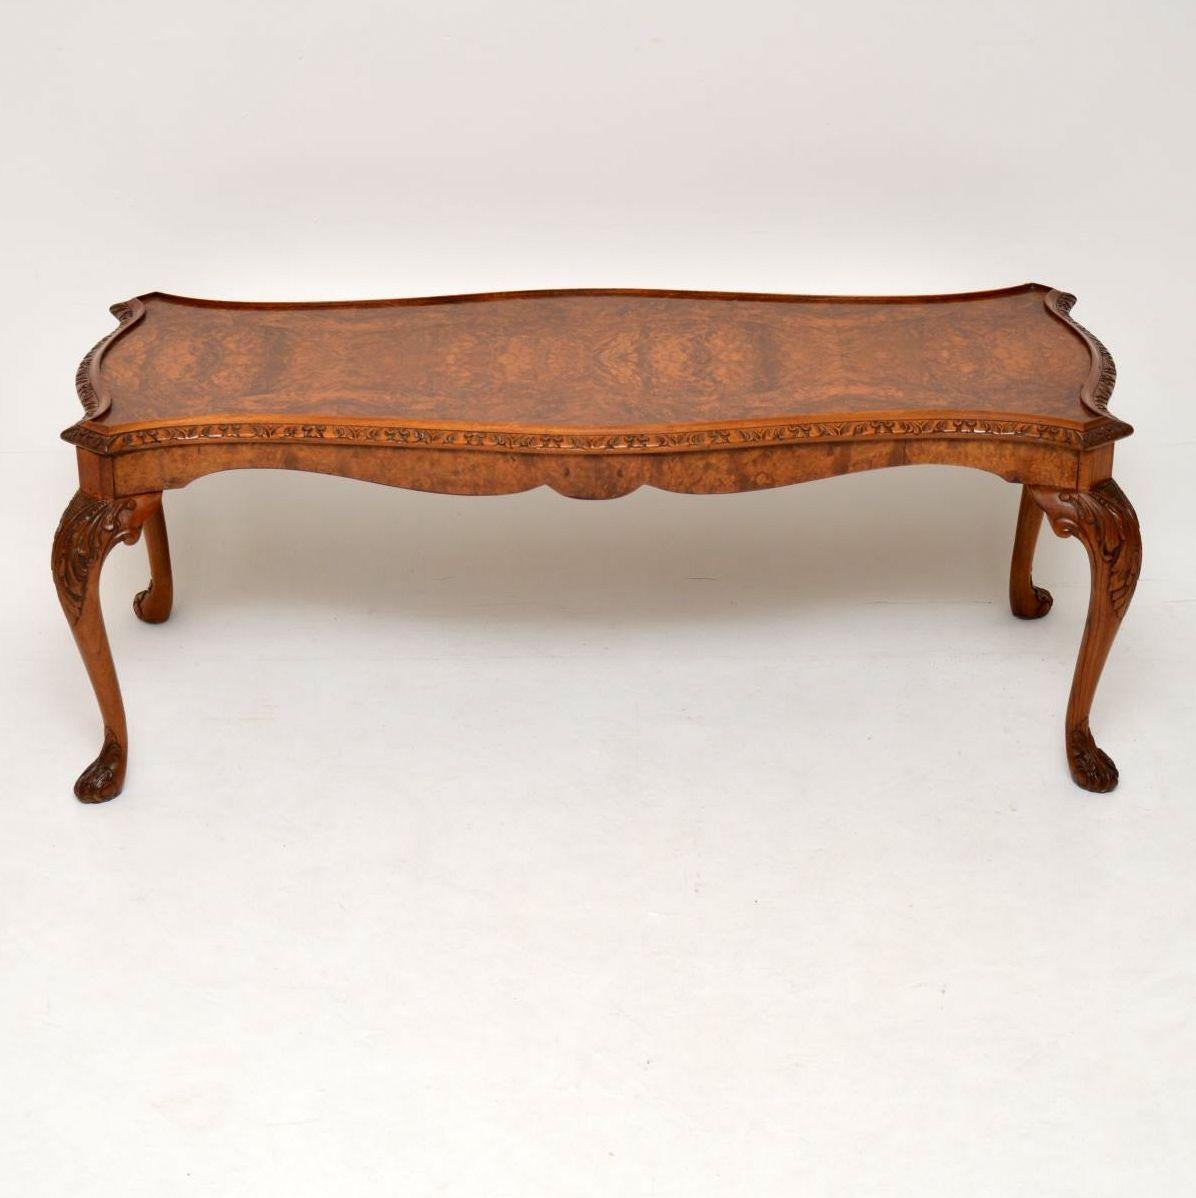 This long coffee table has a nicely patterned burr walnut shaped top & a carved top edge. The solid walnut legs are also well carved top & bottom. It’s antique Queen Anne style, dating to around the 1930s period & is in excellent condition, having